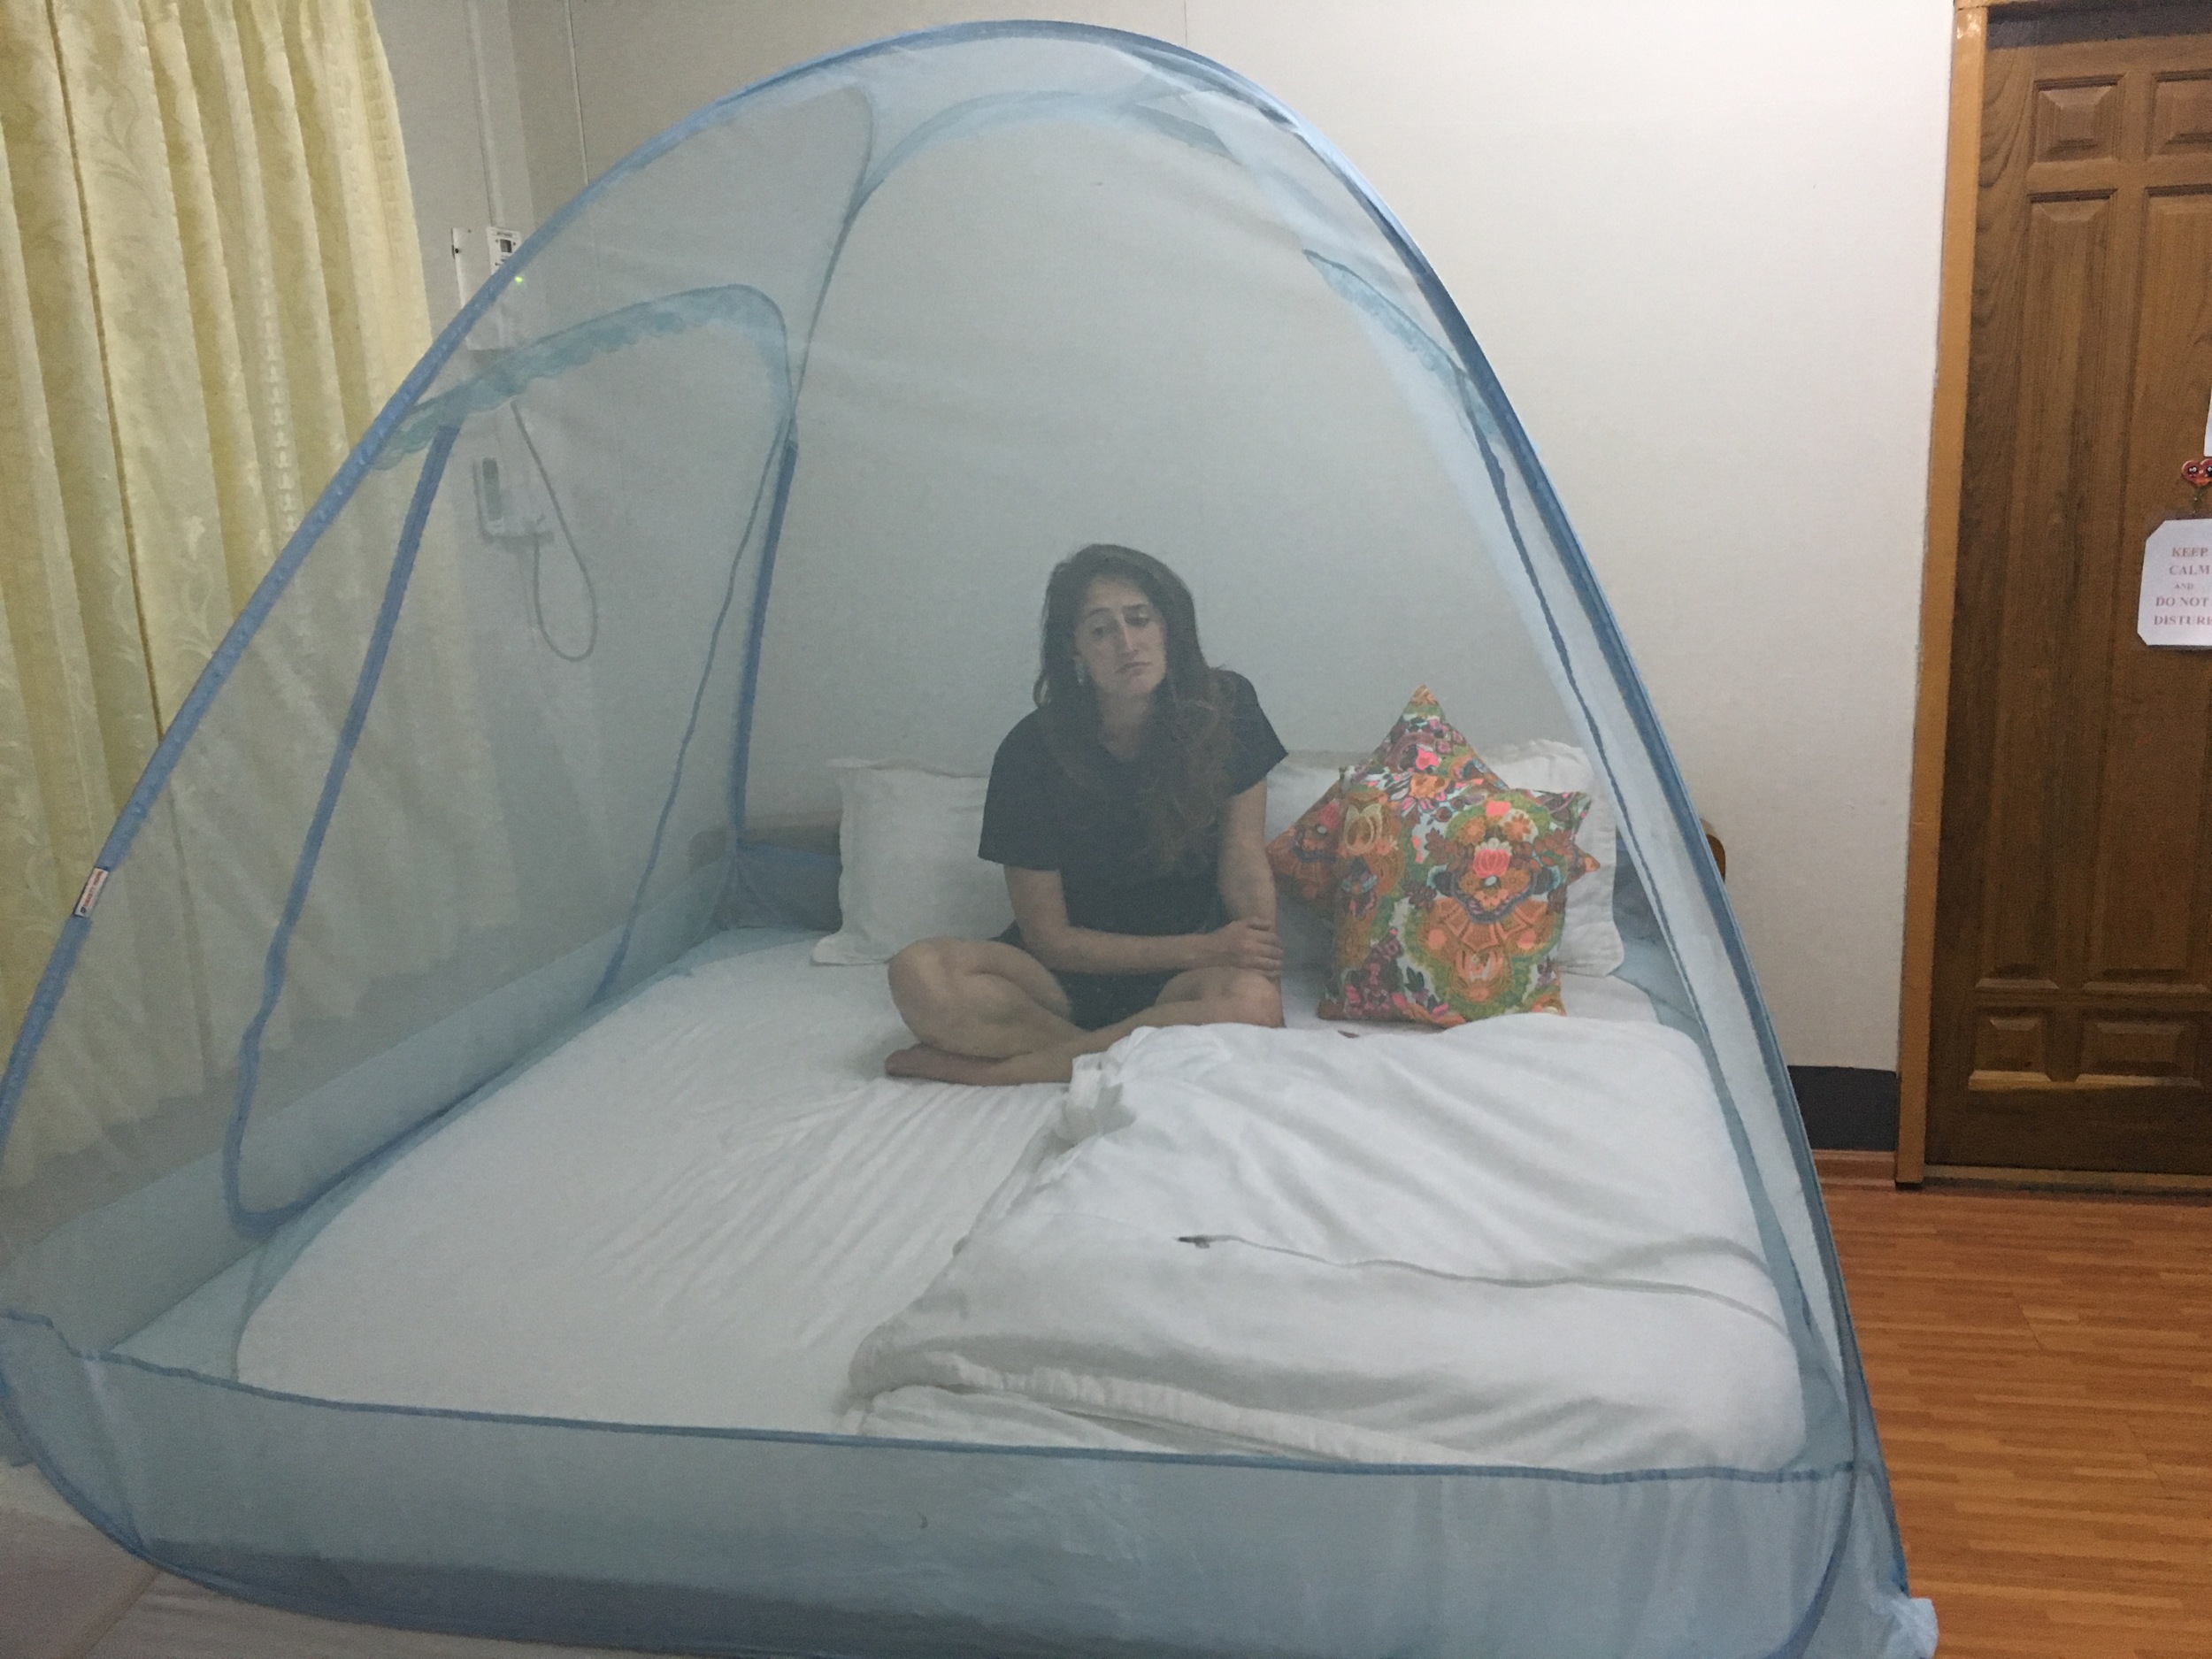 Little mosquito net tent bed!